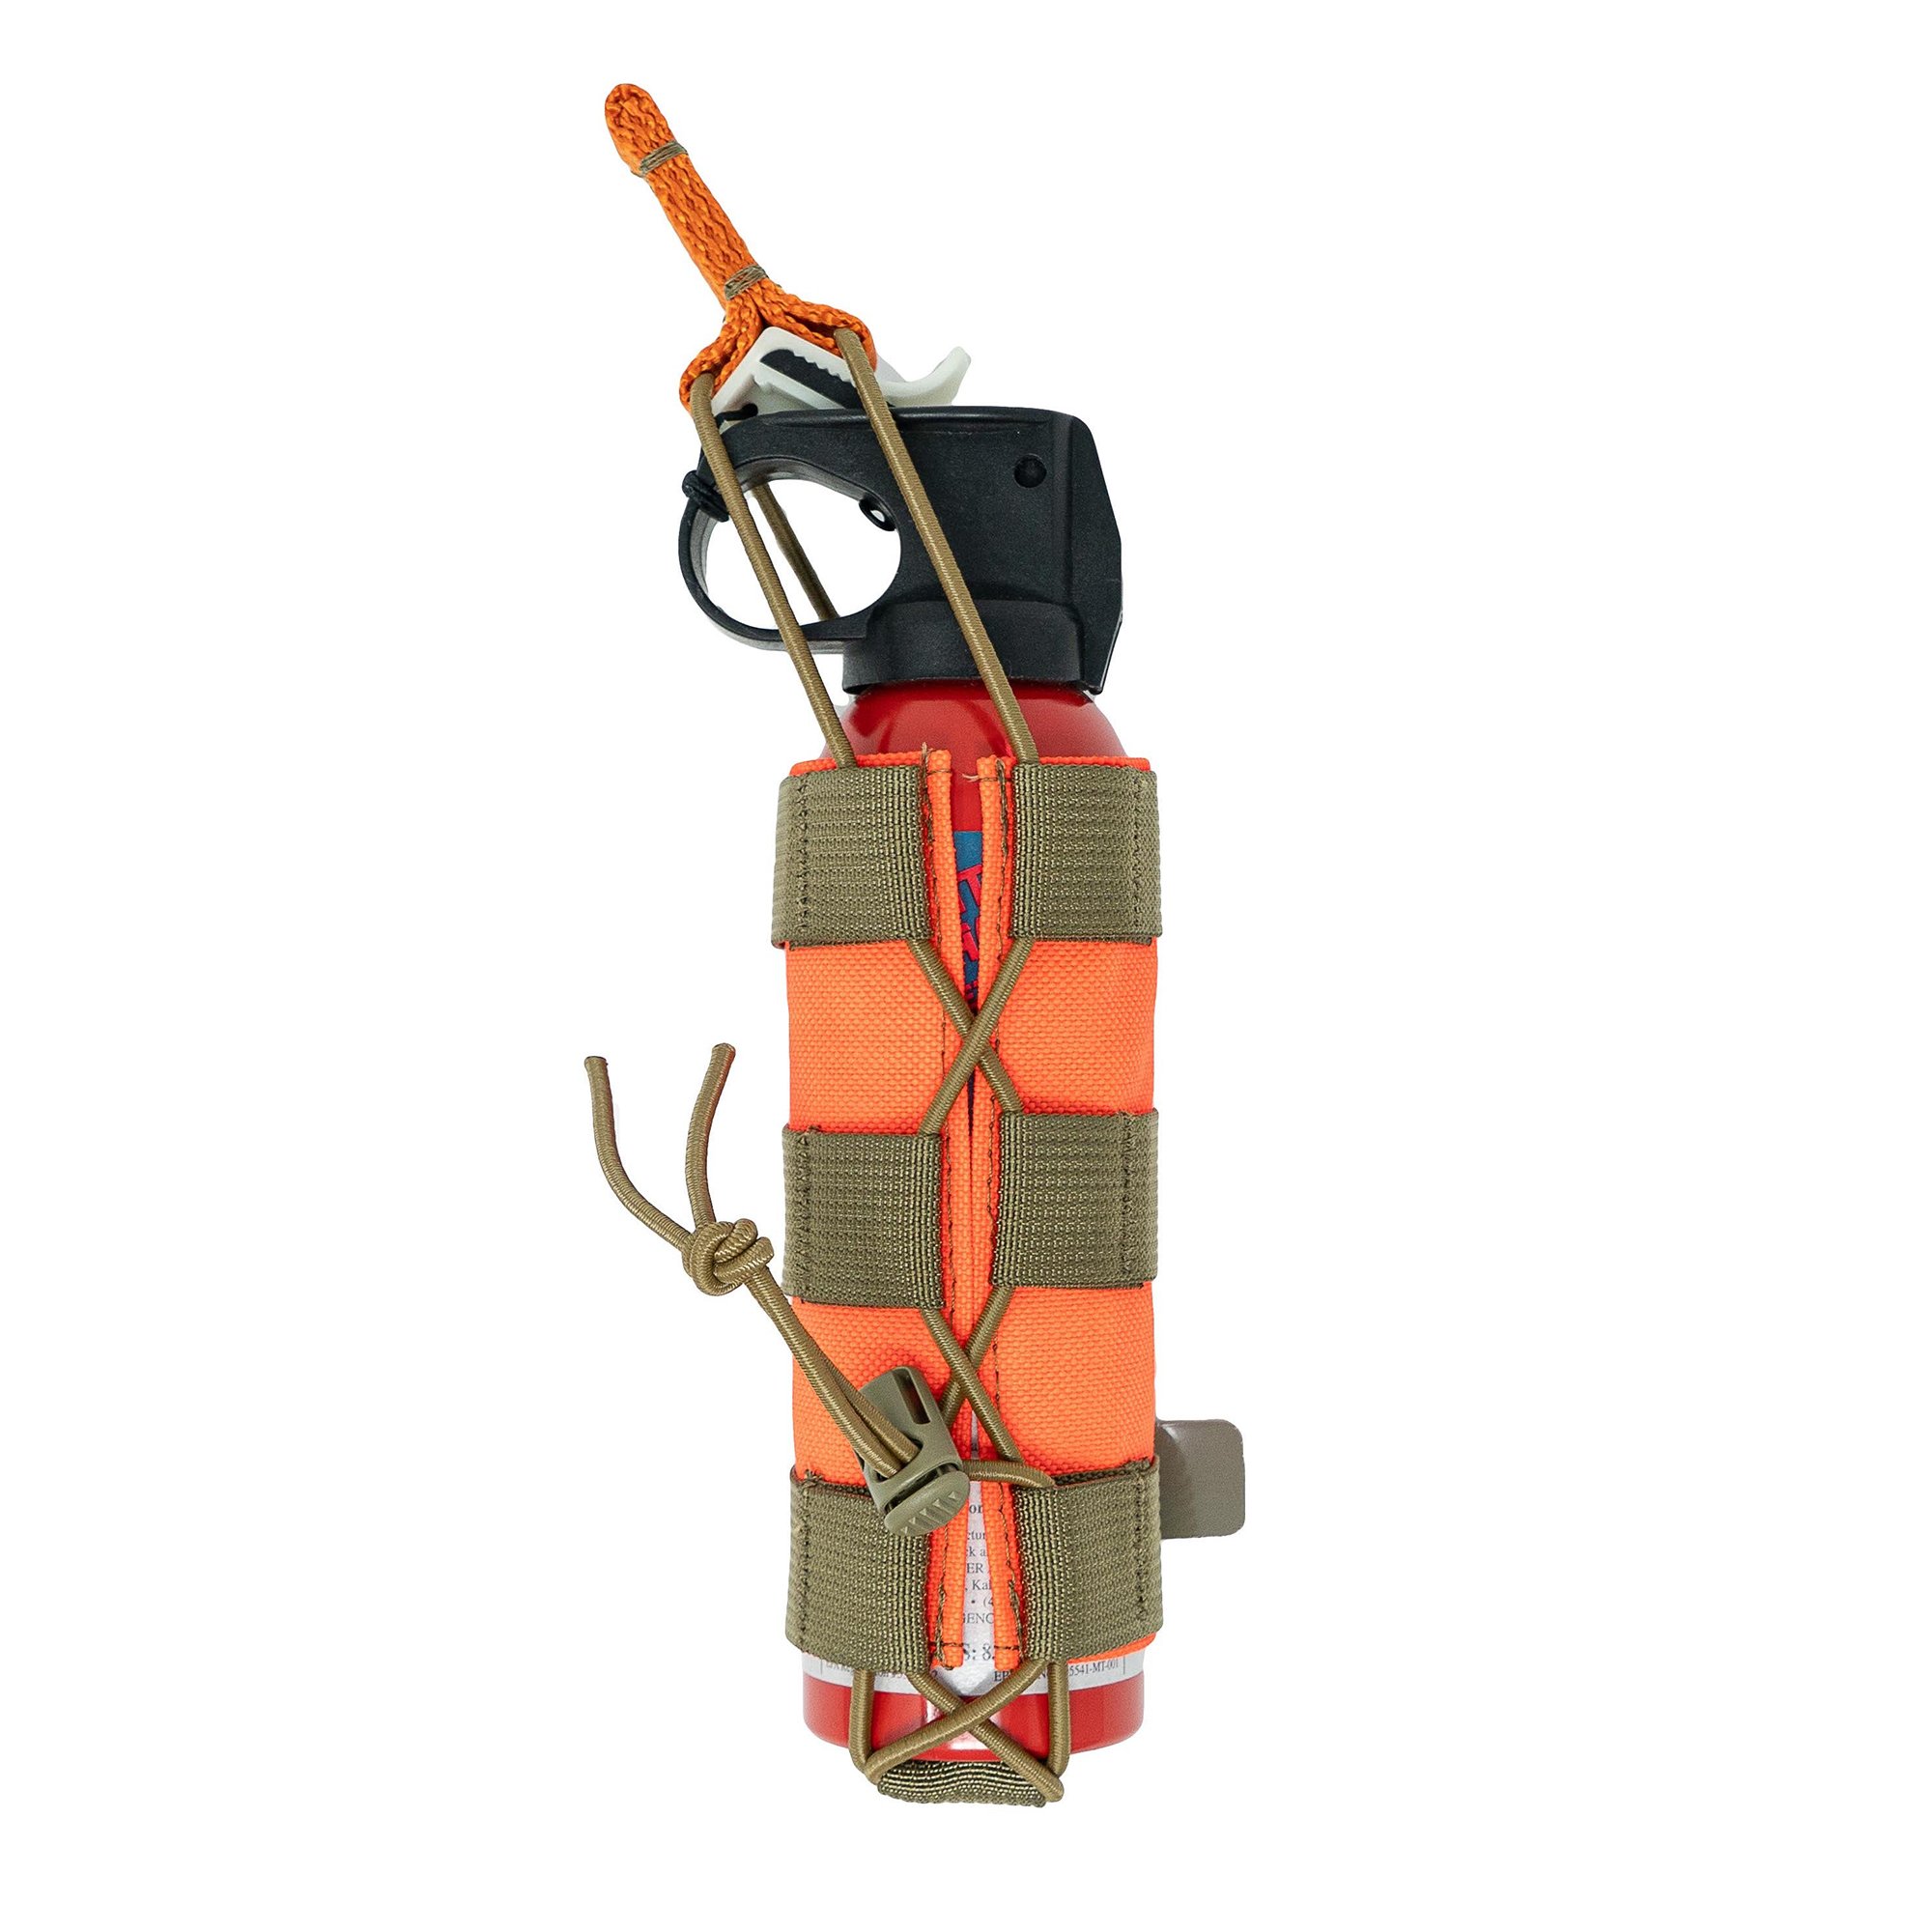 FHF Gear Synergy Series Organizer Bags Coyote Orange Large